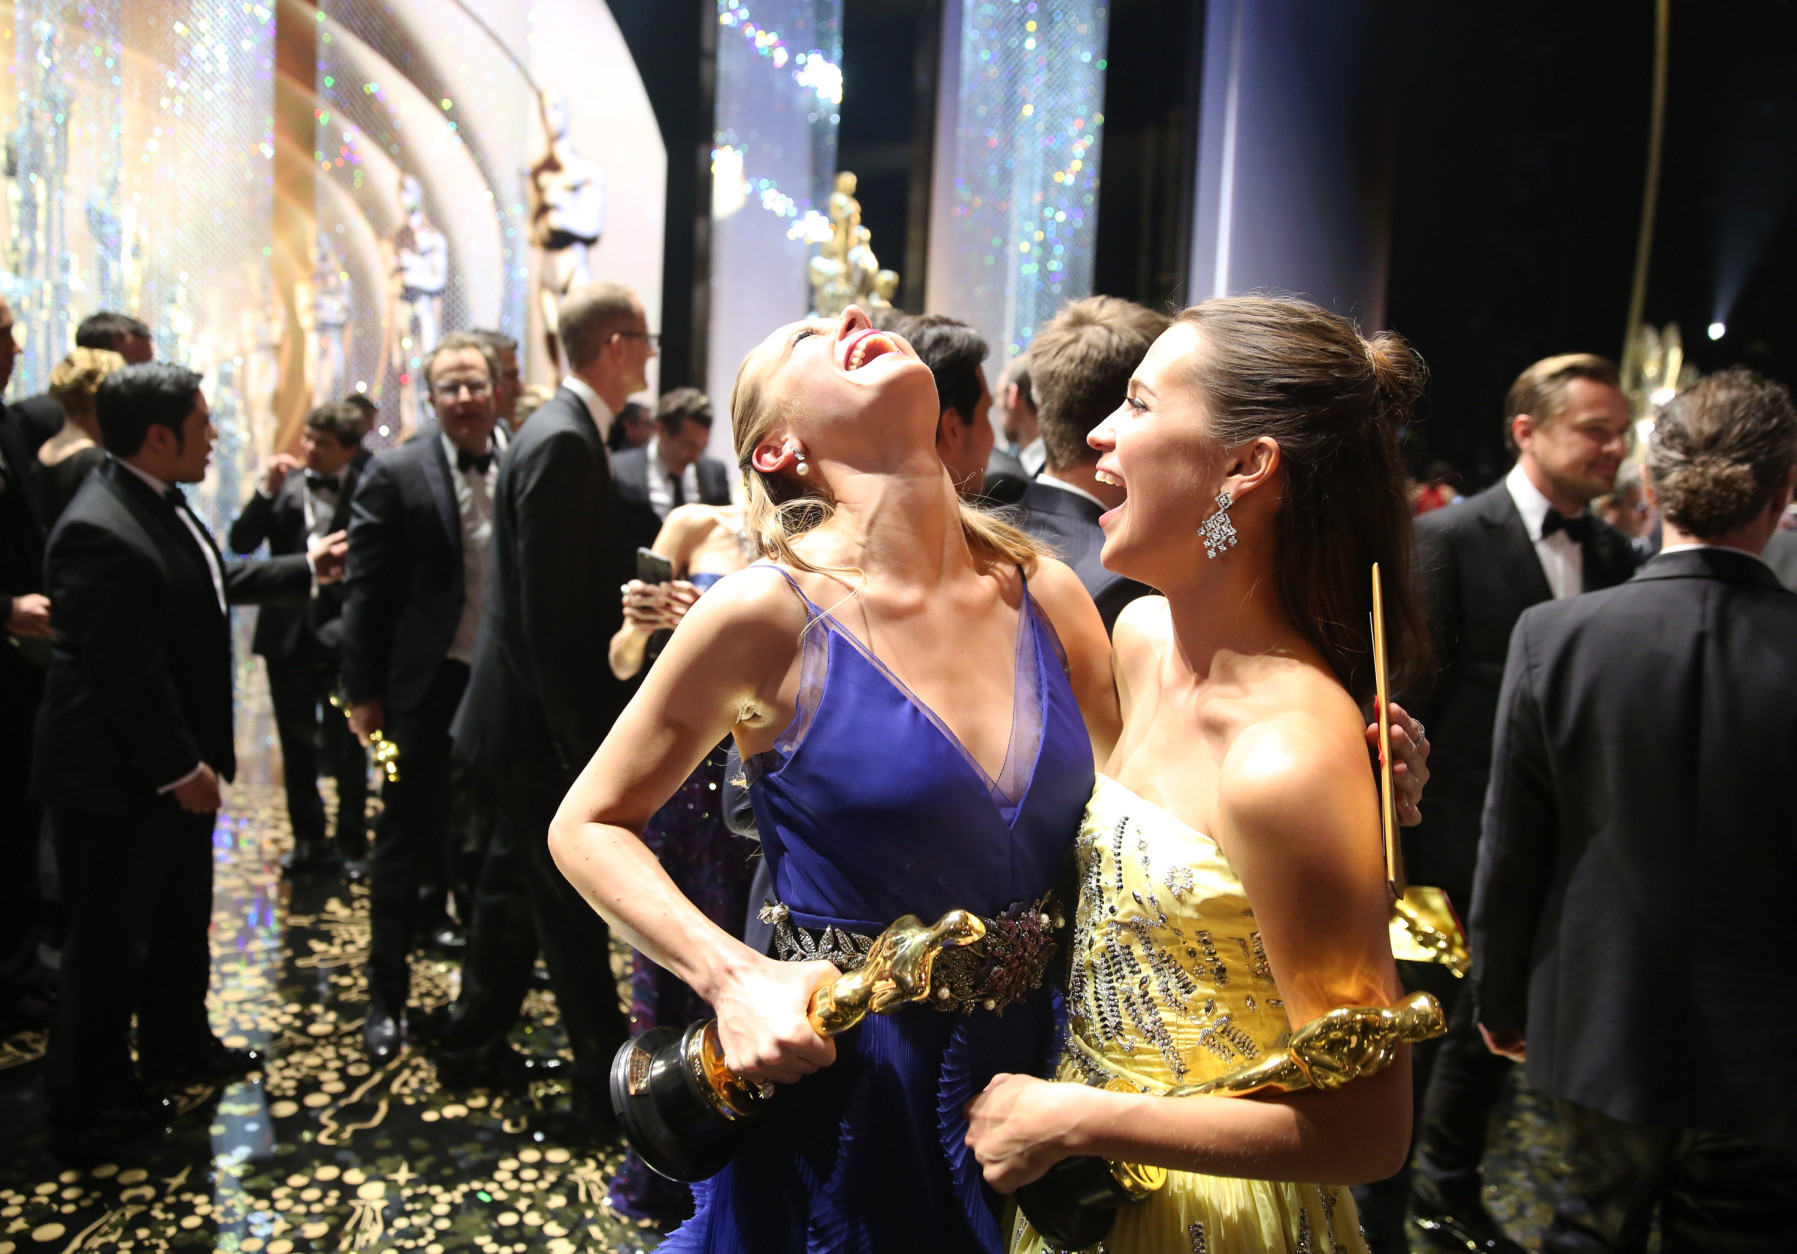 Brie Larson, winner of the award for best actress in a leading role for "Room", left, and Alicia Vikander, winner of the award for best actress in a supporting role for "The Danish Girl" pose backstage at the Oscars on Sunday, Feb. 28, 2016, at the Dolby Theatre in Los Angeles. (Photo by Matt Sayles/Invision/AP)